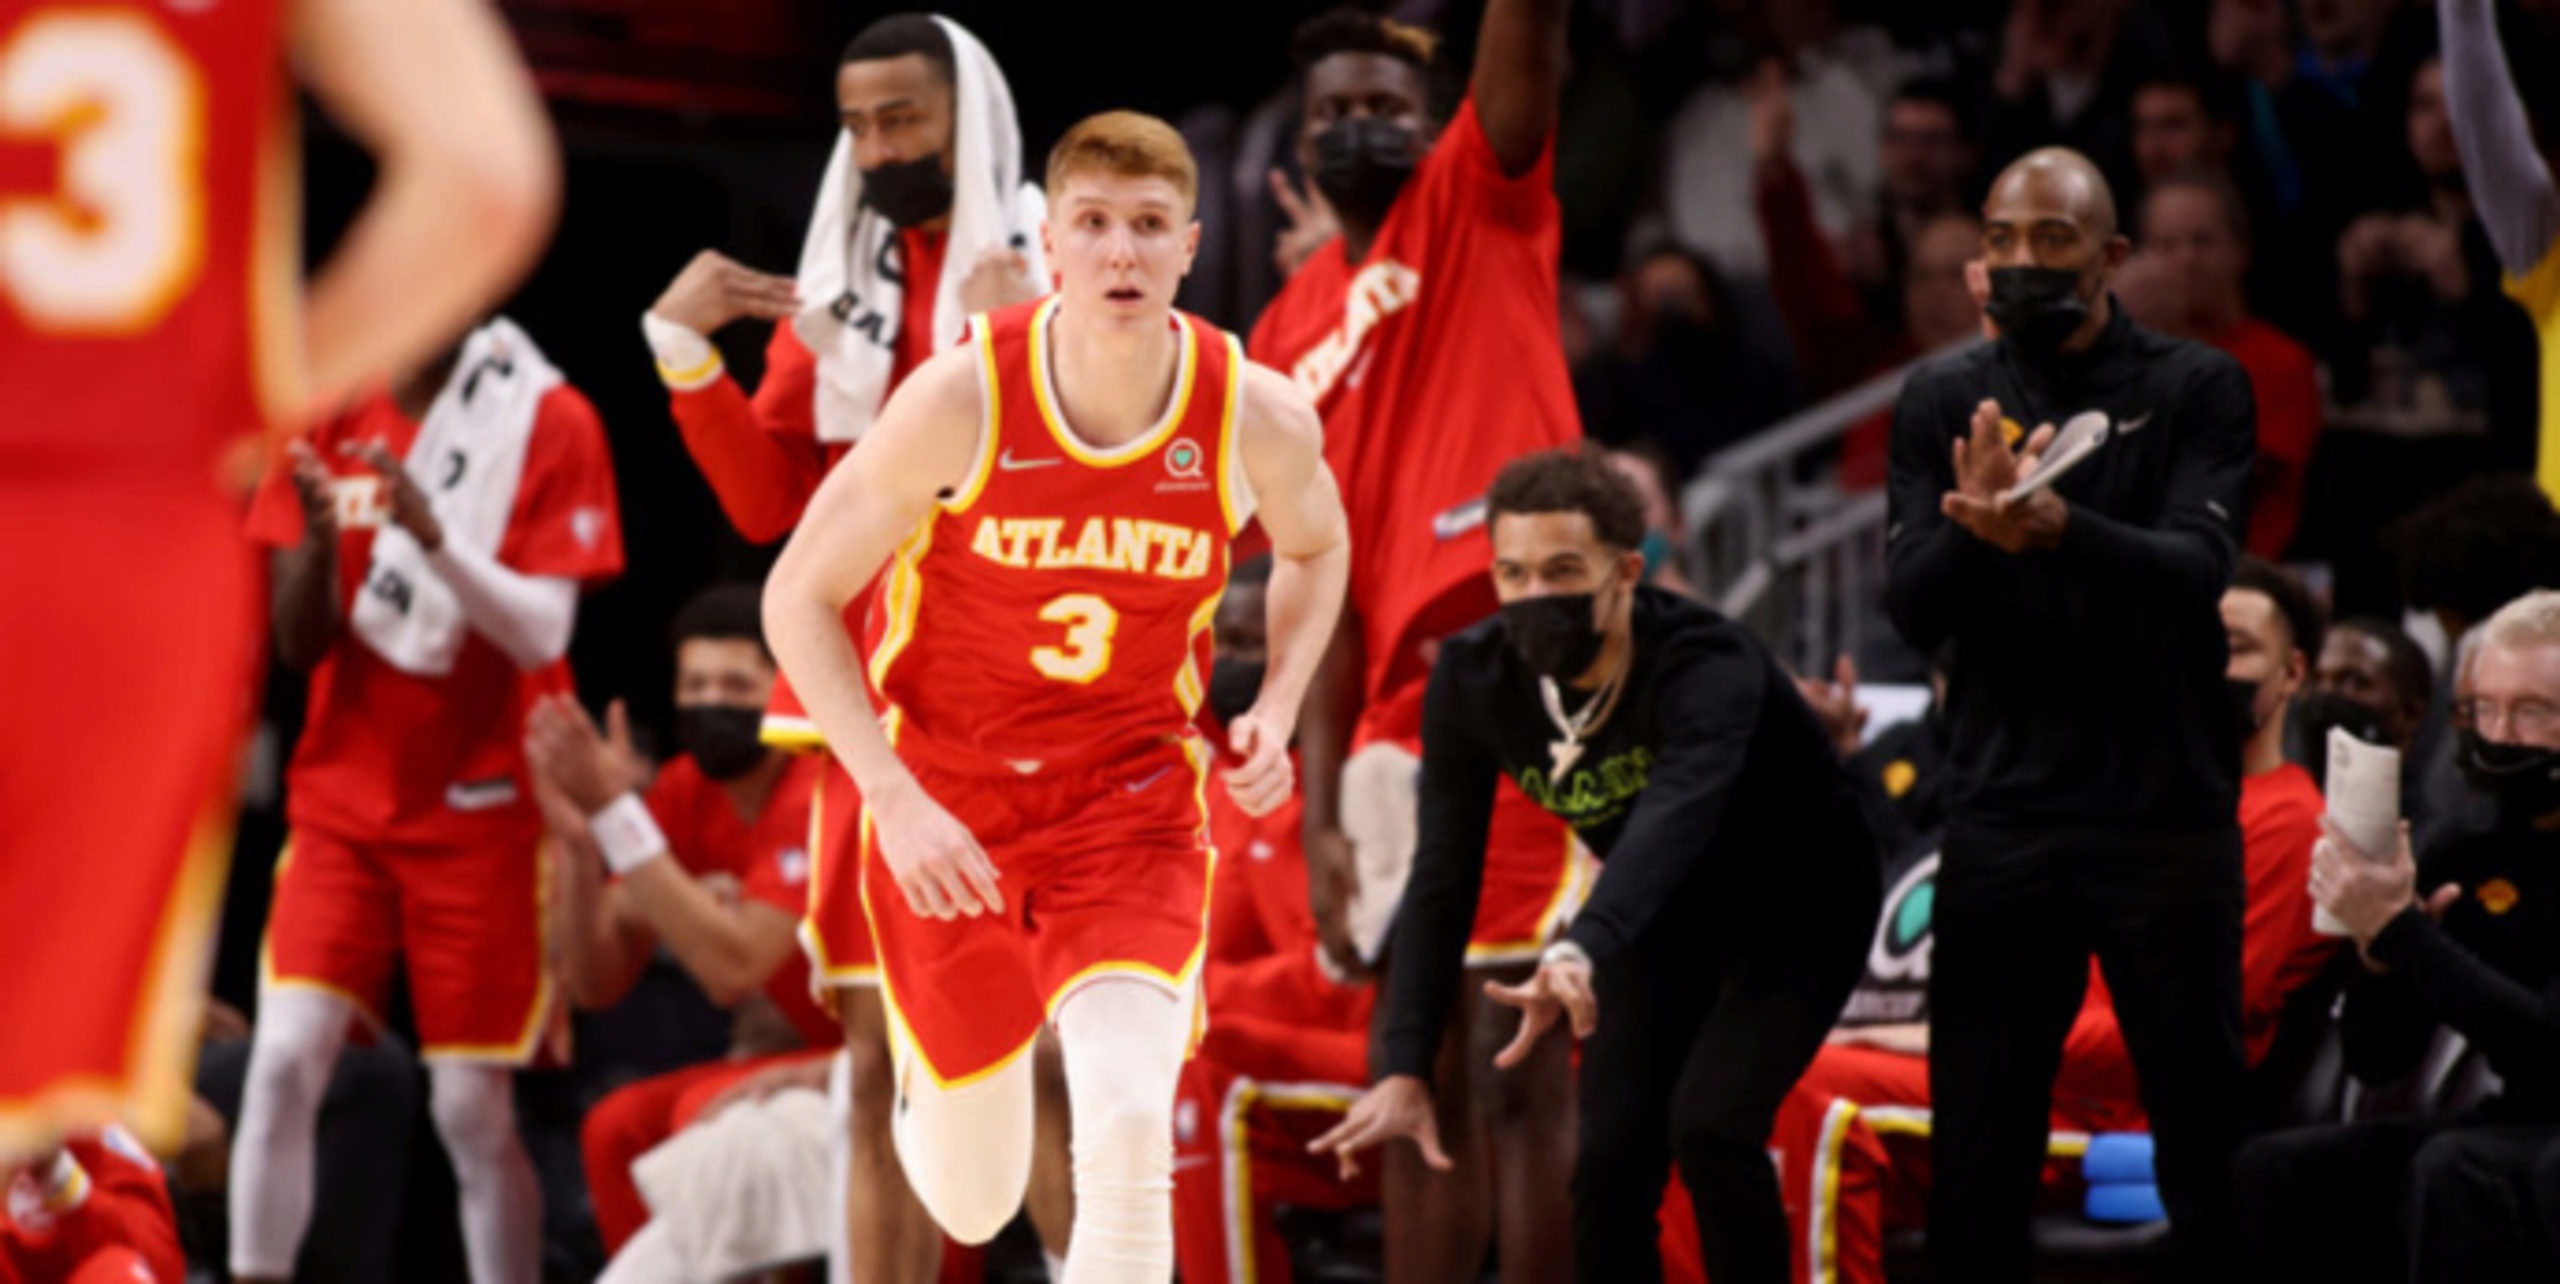 Hawks hope to improve playoff standing in key 4-game stretch